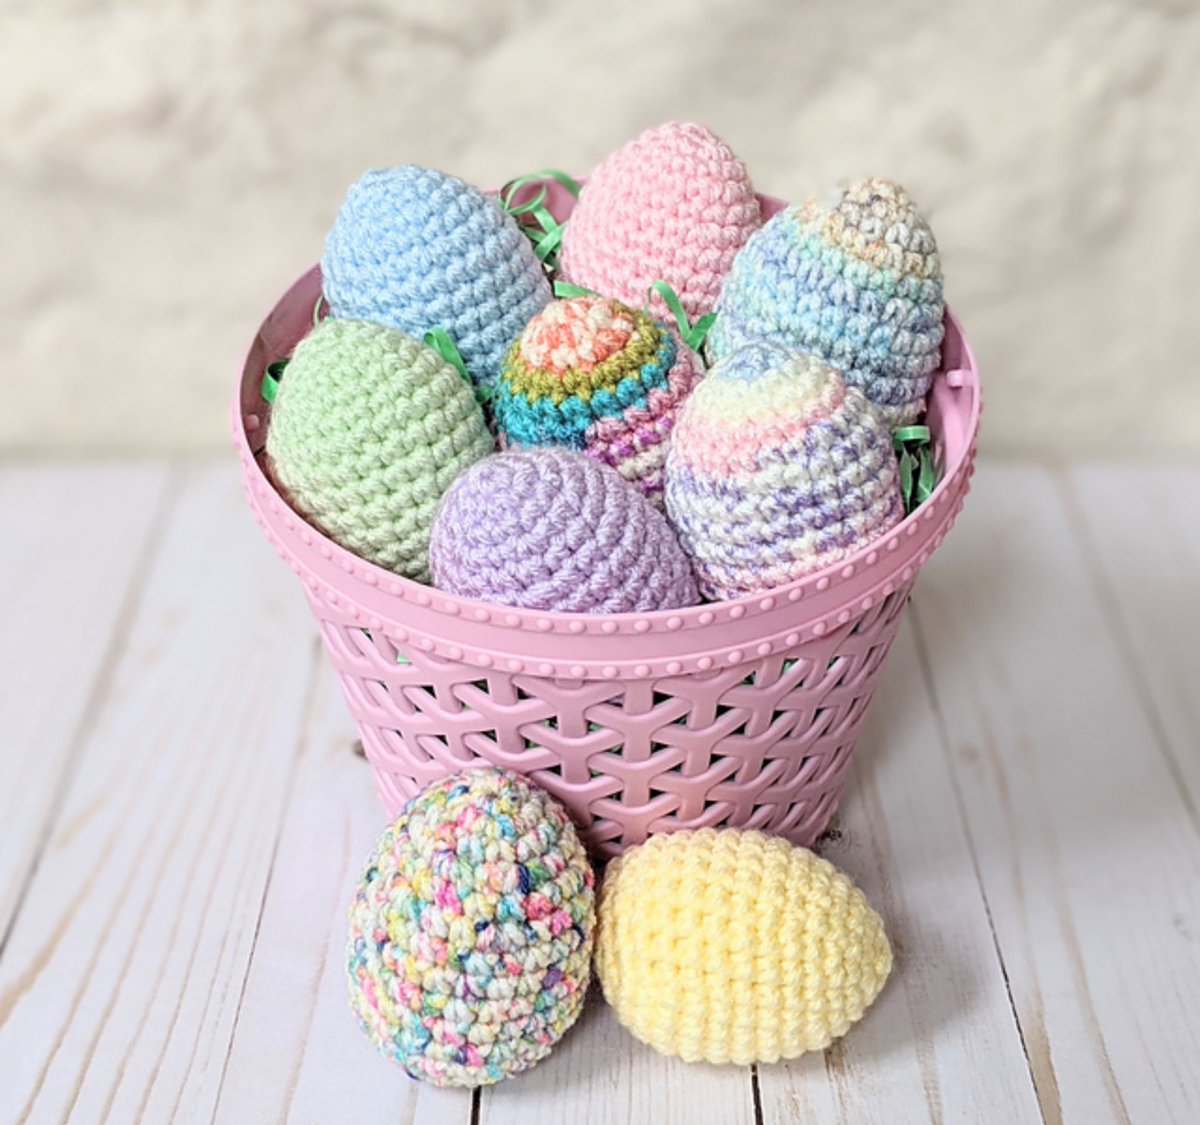 So Eggciting! It's almost Easter! Check out this adorable FREE #crochet pattern! ravel.me/easter-eggs-52 
.
.
.
#Crochet, #Crocheting, #CrochetAddict, #CrochetersOfInstagram, #InstaCrochet, #CrochetLove, #CrochetLove, #CrochetAddict, #ILoveCrochet, #LoveCrochet, #CrochetEveryD...